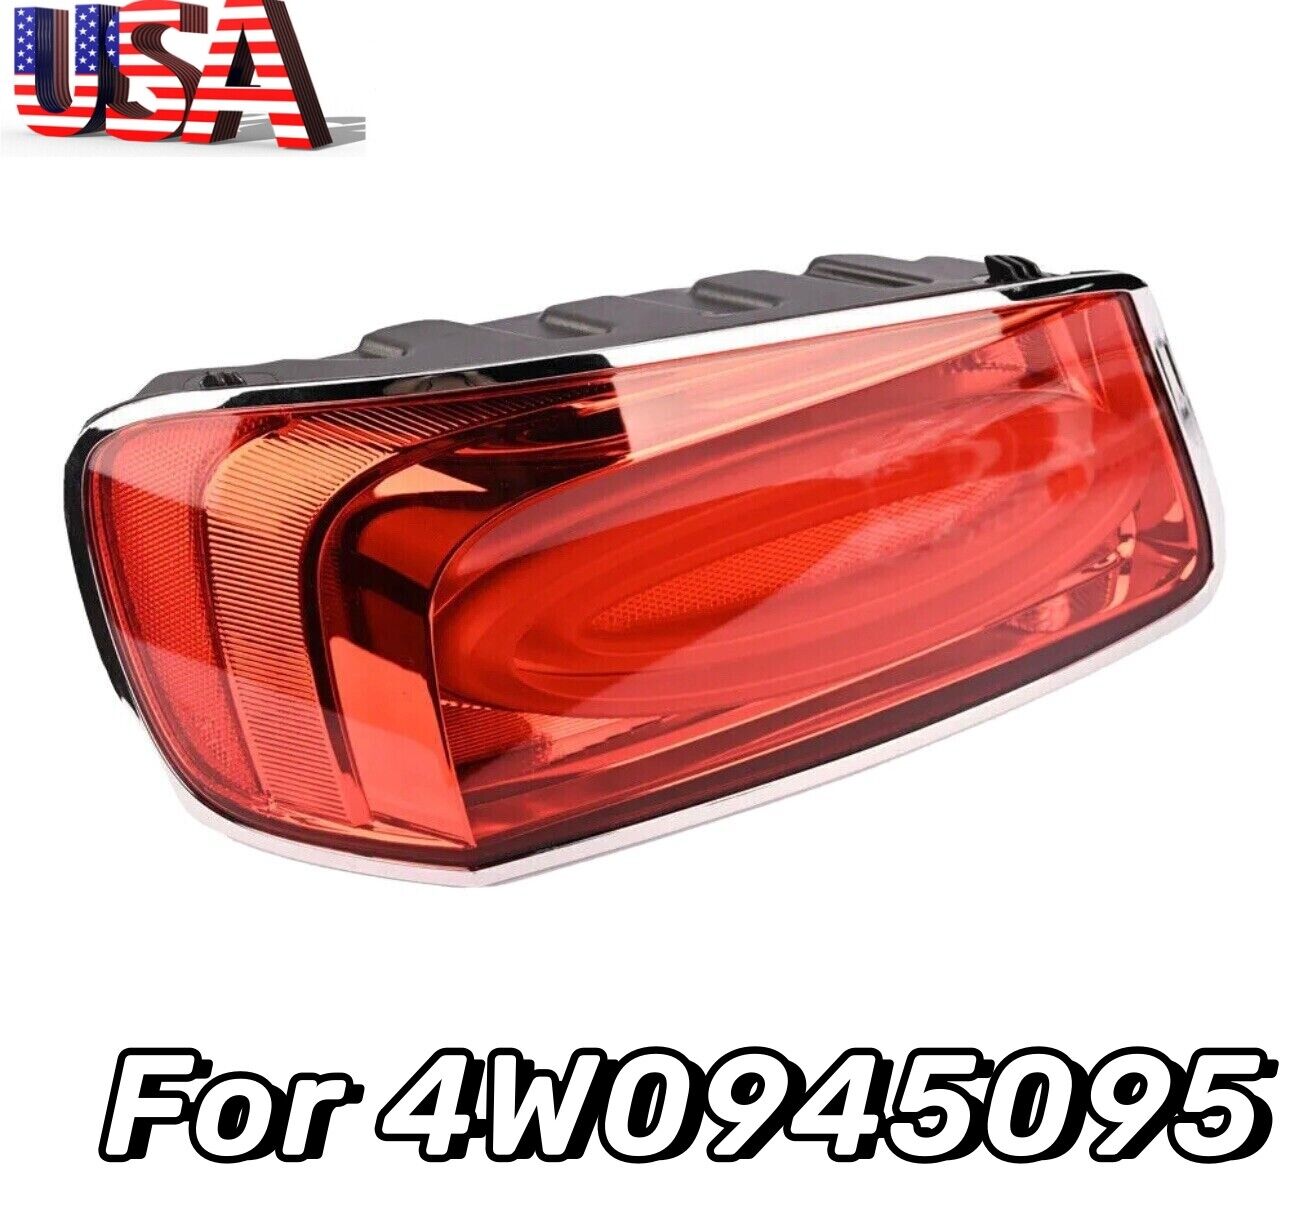 Fits Bentley Continental Flying Spur Rear Left Tail Light 2013-2018 US SELLER